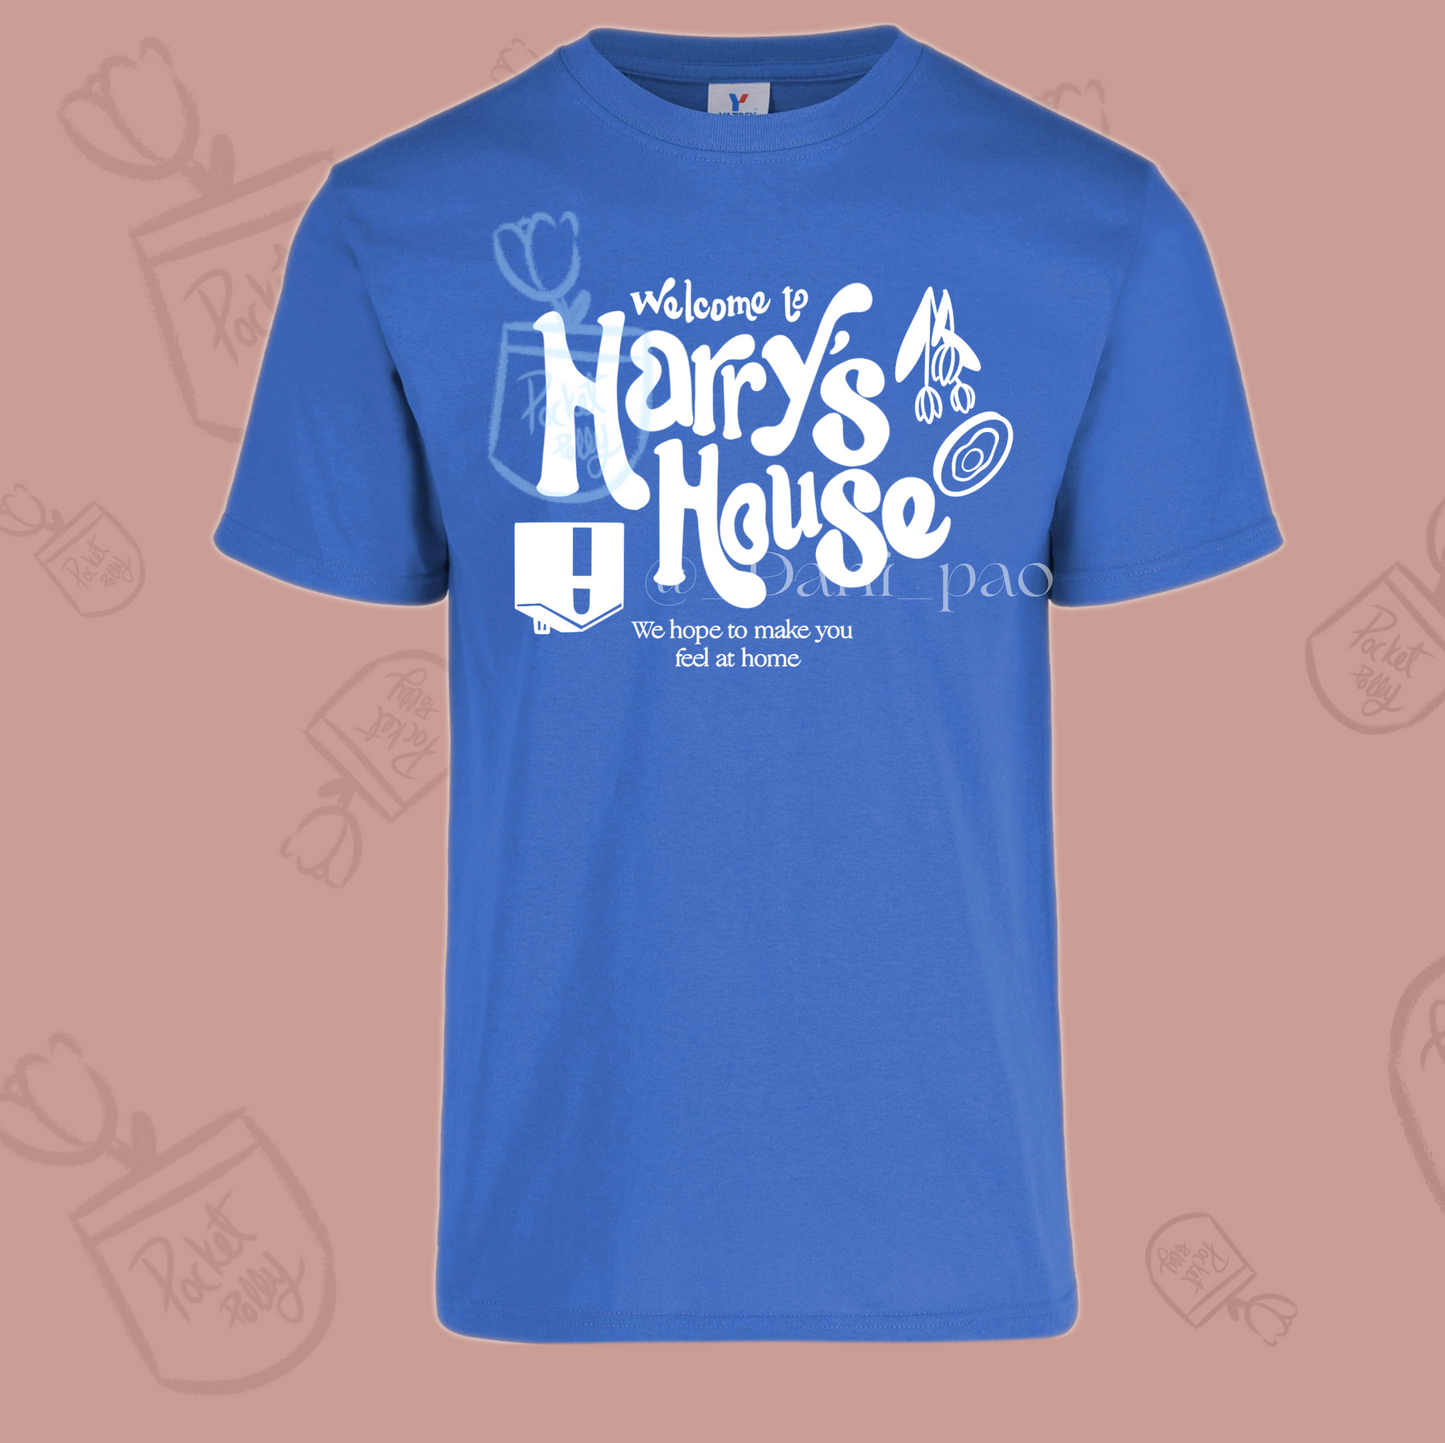 Welcome to Harry’s house tshirt